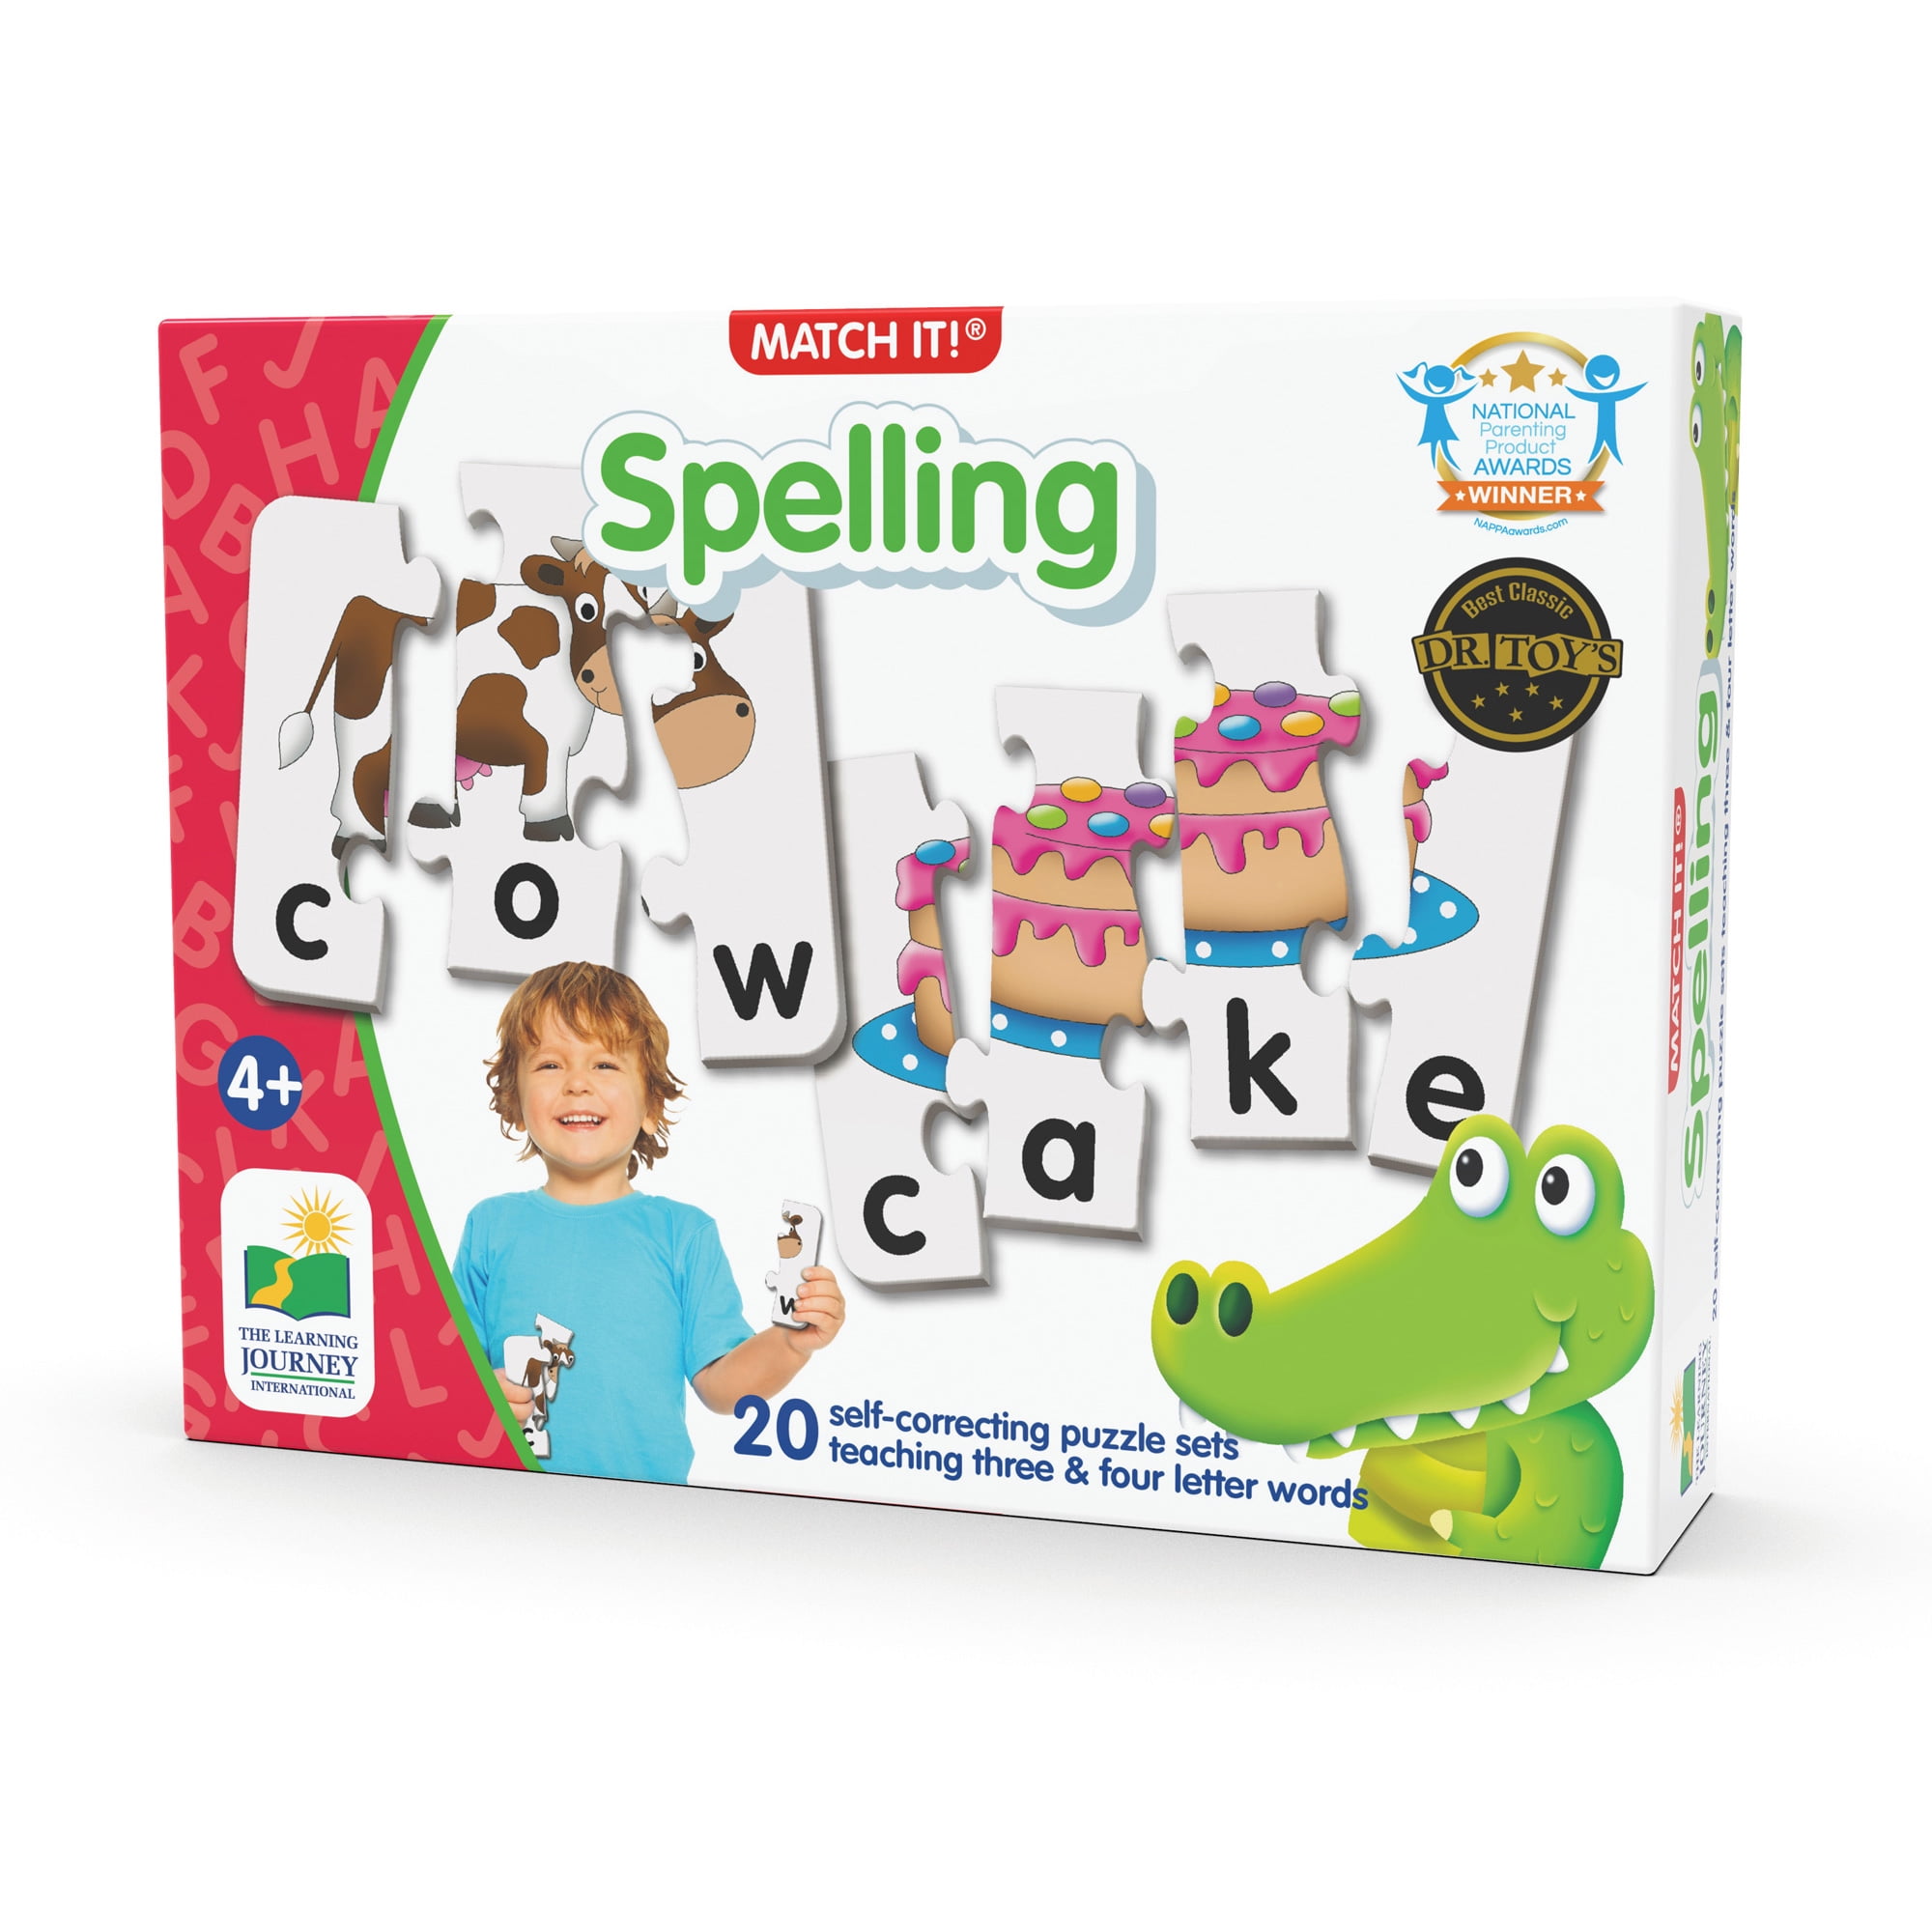 3 Letter Words The Learning Journey Match It! 20 Self-Correcting Reading 